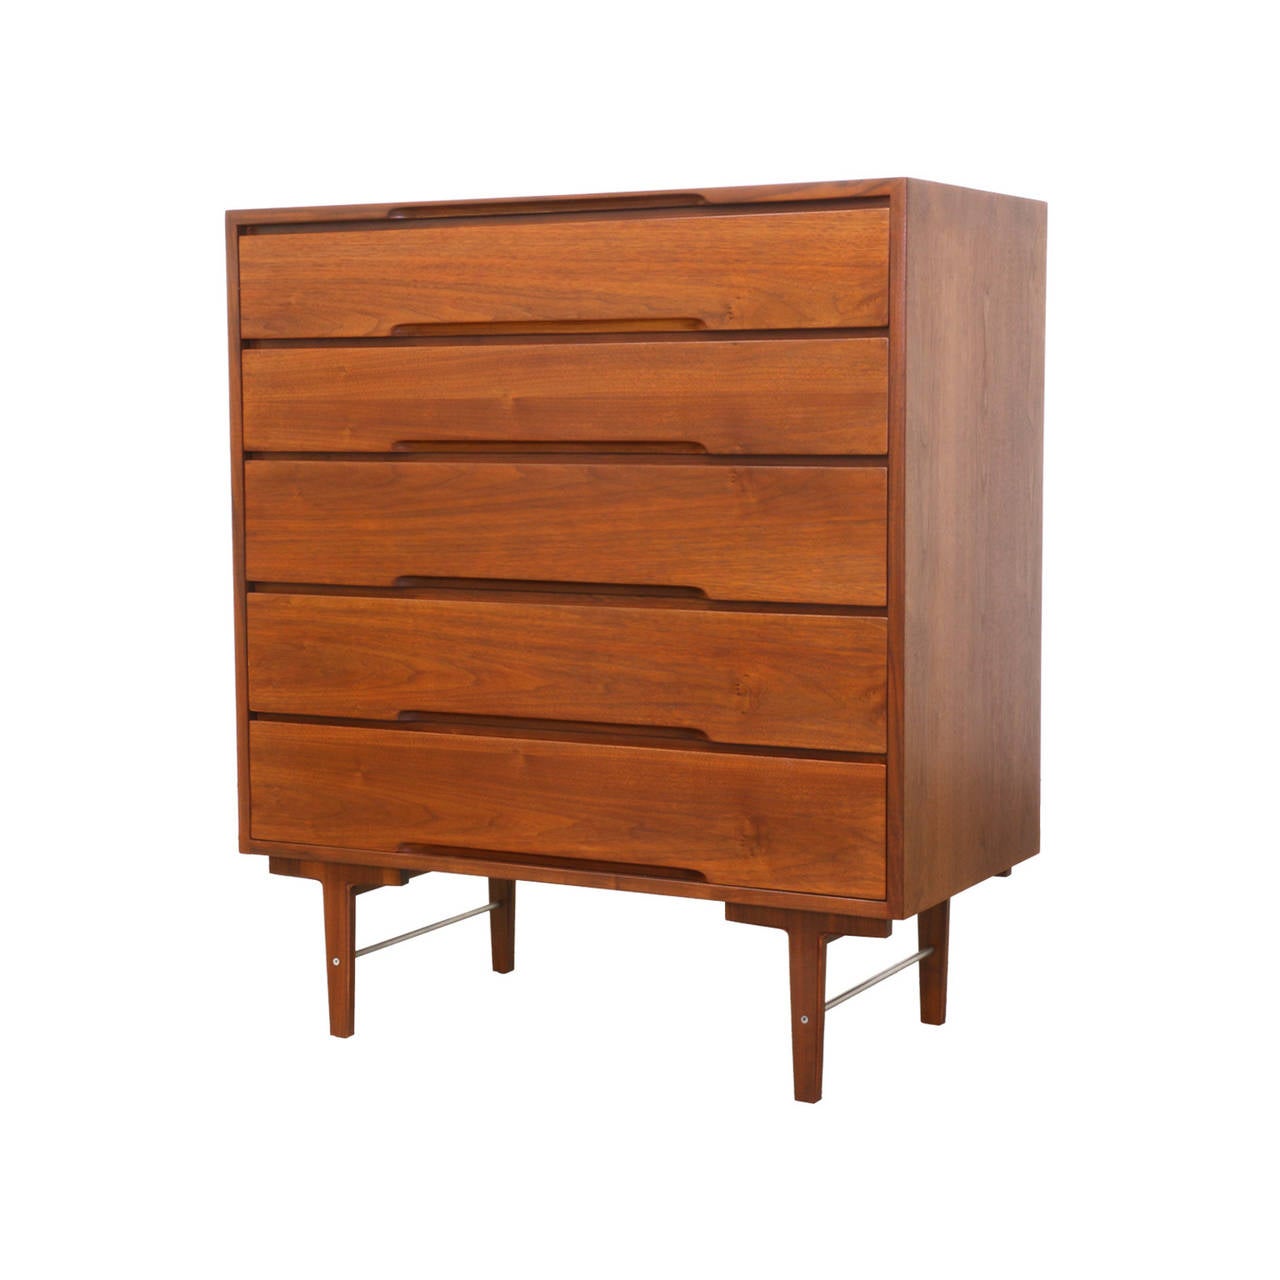 Designer: Unknown
Manufacturer: Unknown
Period/Style: Mid Century Modern
Country: United States
Date: 1950’s

Dimensions: 41″H x 36″W x 17.75″D
Materials: Walnut, Steel
Condition: Excellent – Newly Refinished
Number of Items: 1
ID Number: